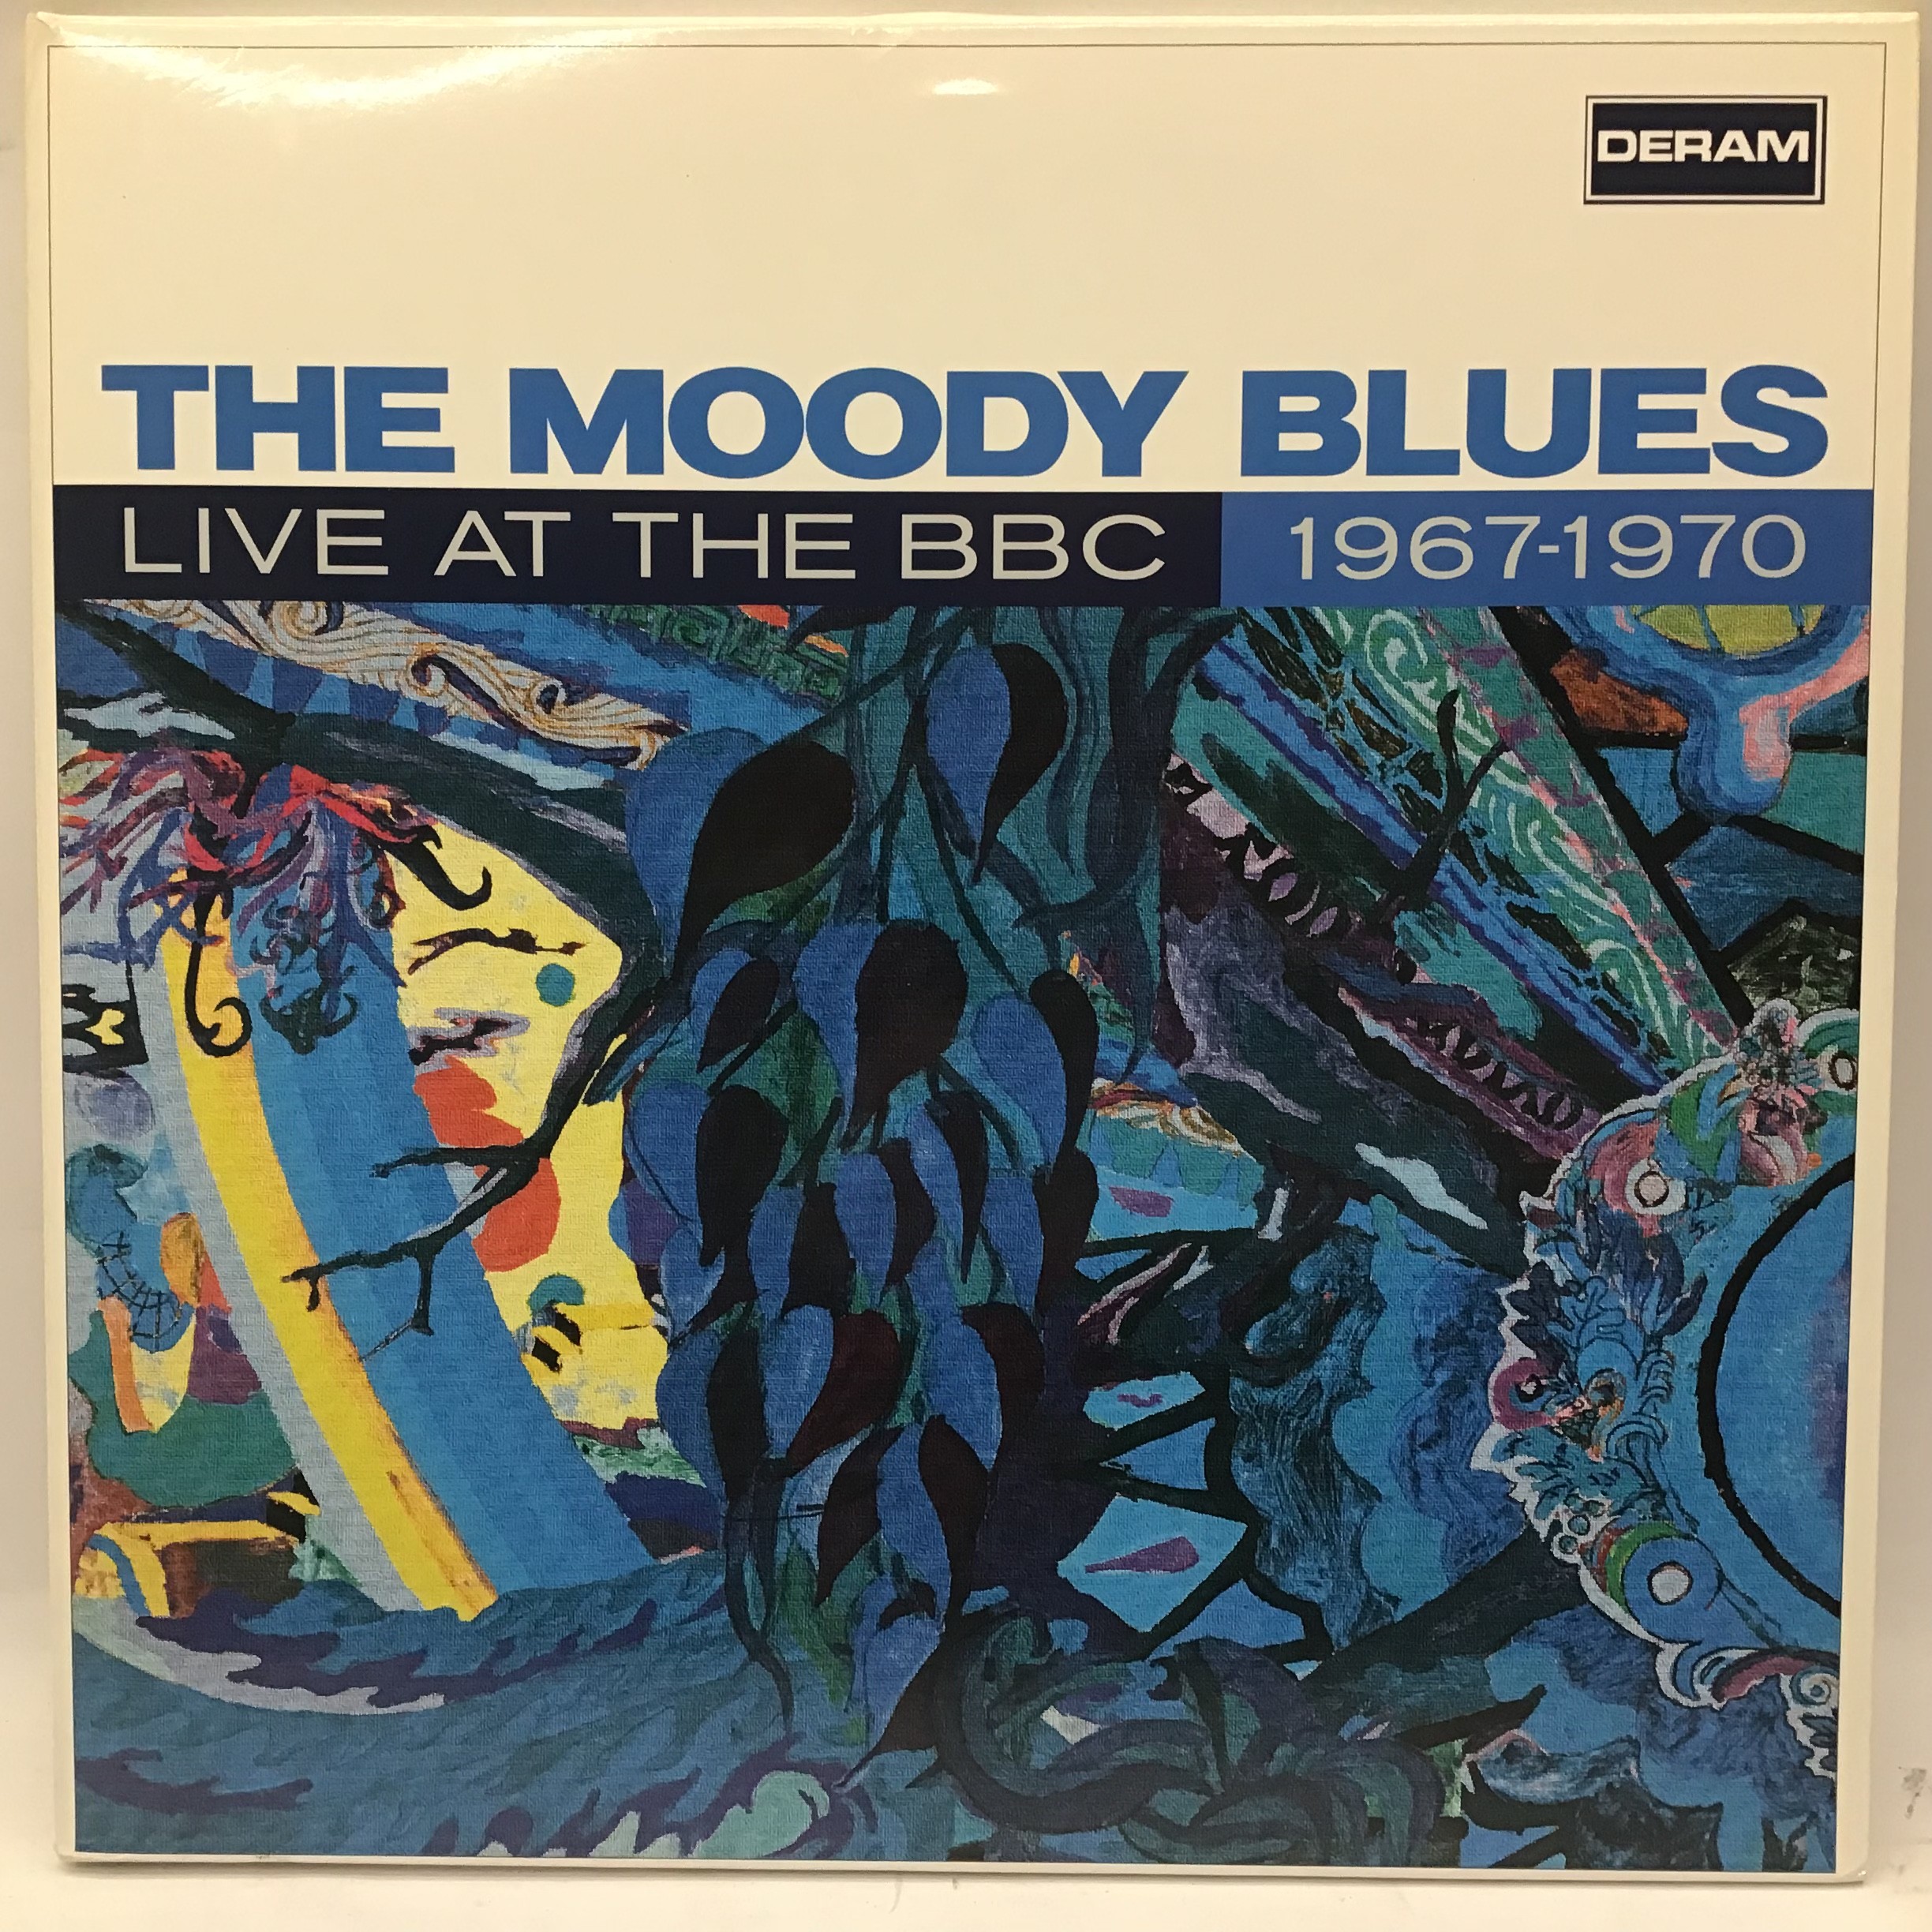 THE MOODY BLUES 'LIVE AT THE BBC' VINYL ALBUM. This 3 record set comes pressed on 2 x blue colored